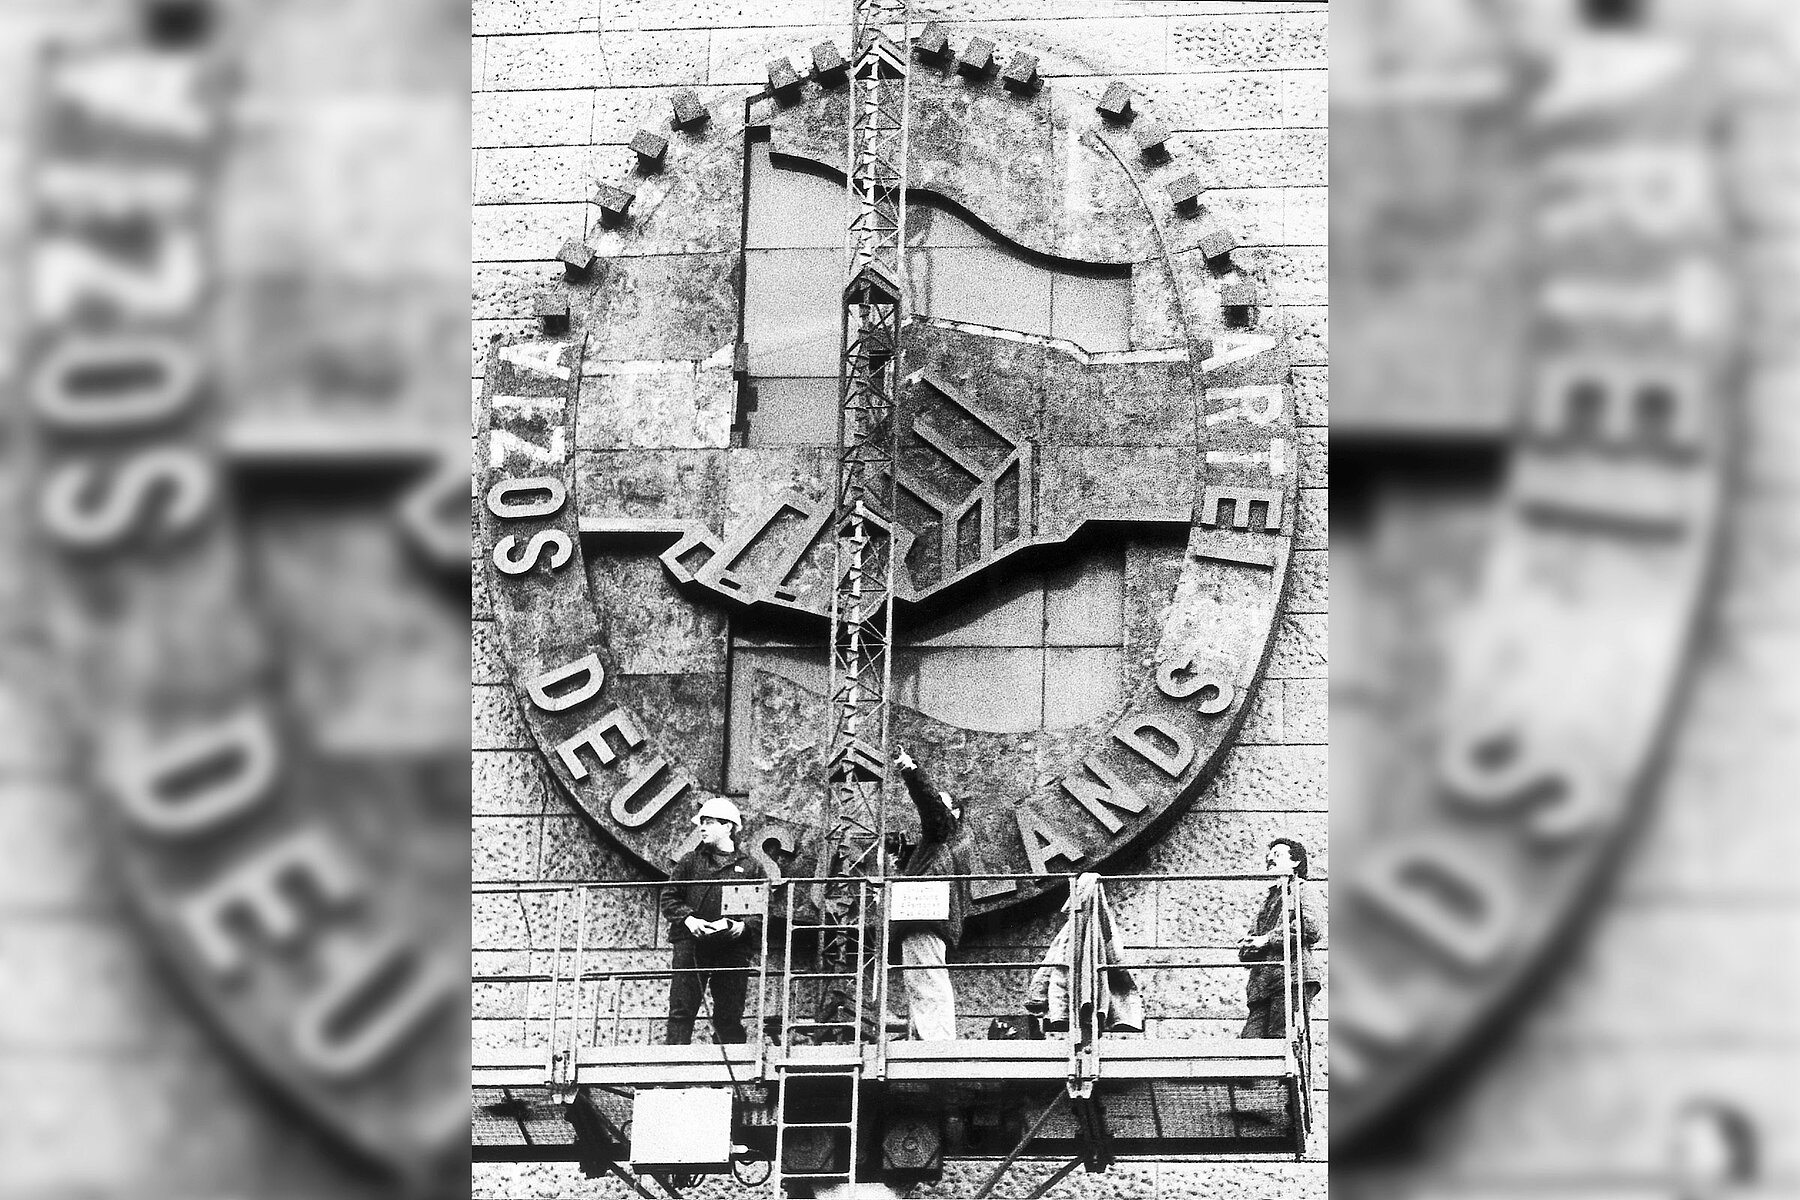 Three workers on a scaffold remove a symbol that is made of stone and several metres high from the facade of the Haus am Werderschen Markt. The symbol depicts the words Socialist Party of Germany and a handshake. 